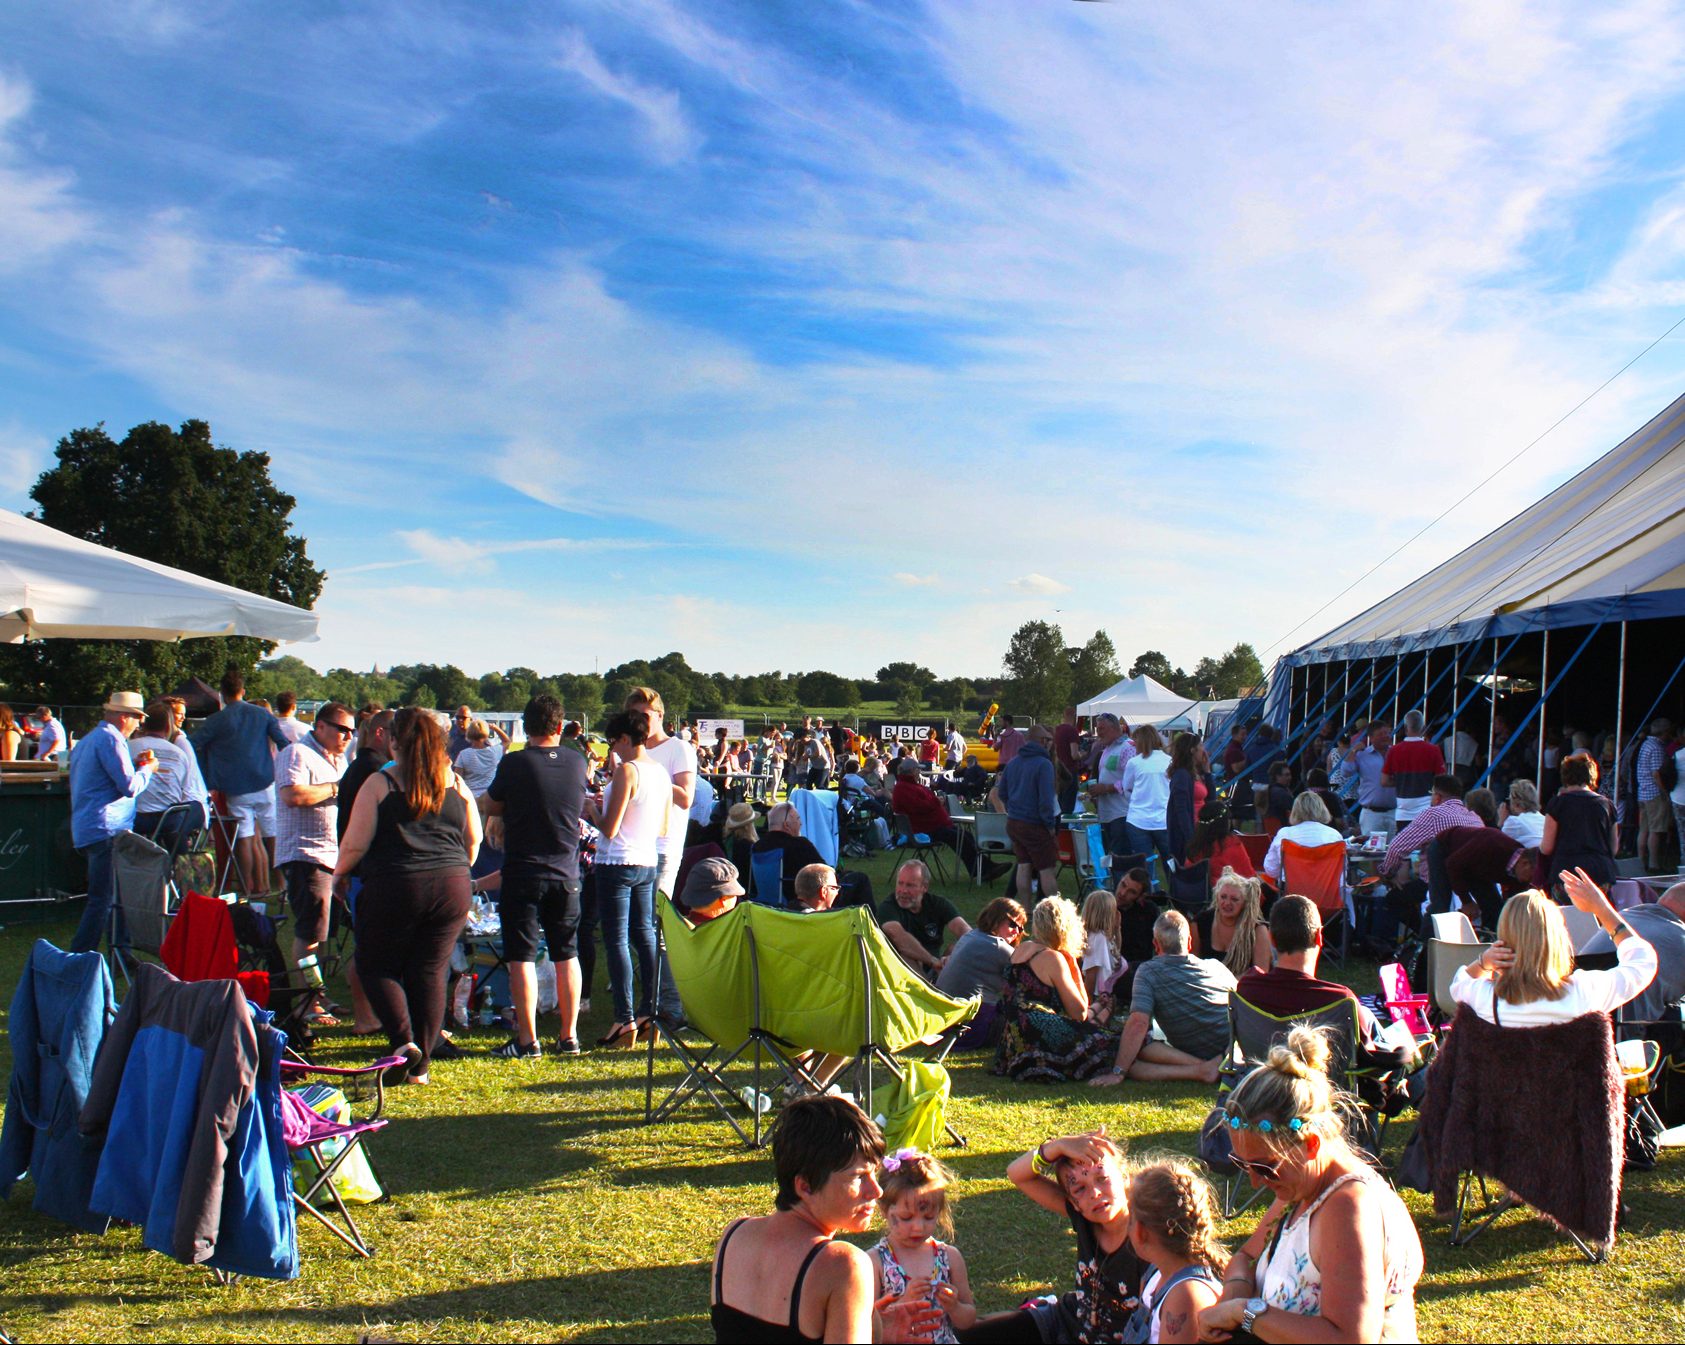 An image of lots of people crowding at Bures Music Festival. There is a blue sky in the background.